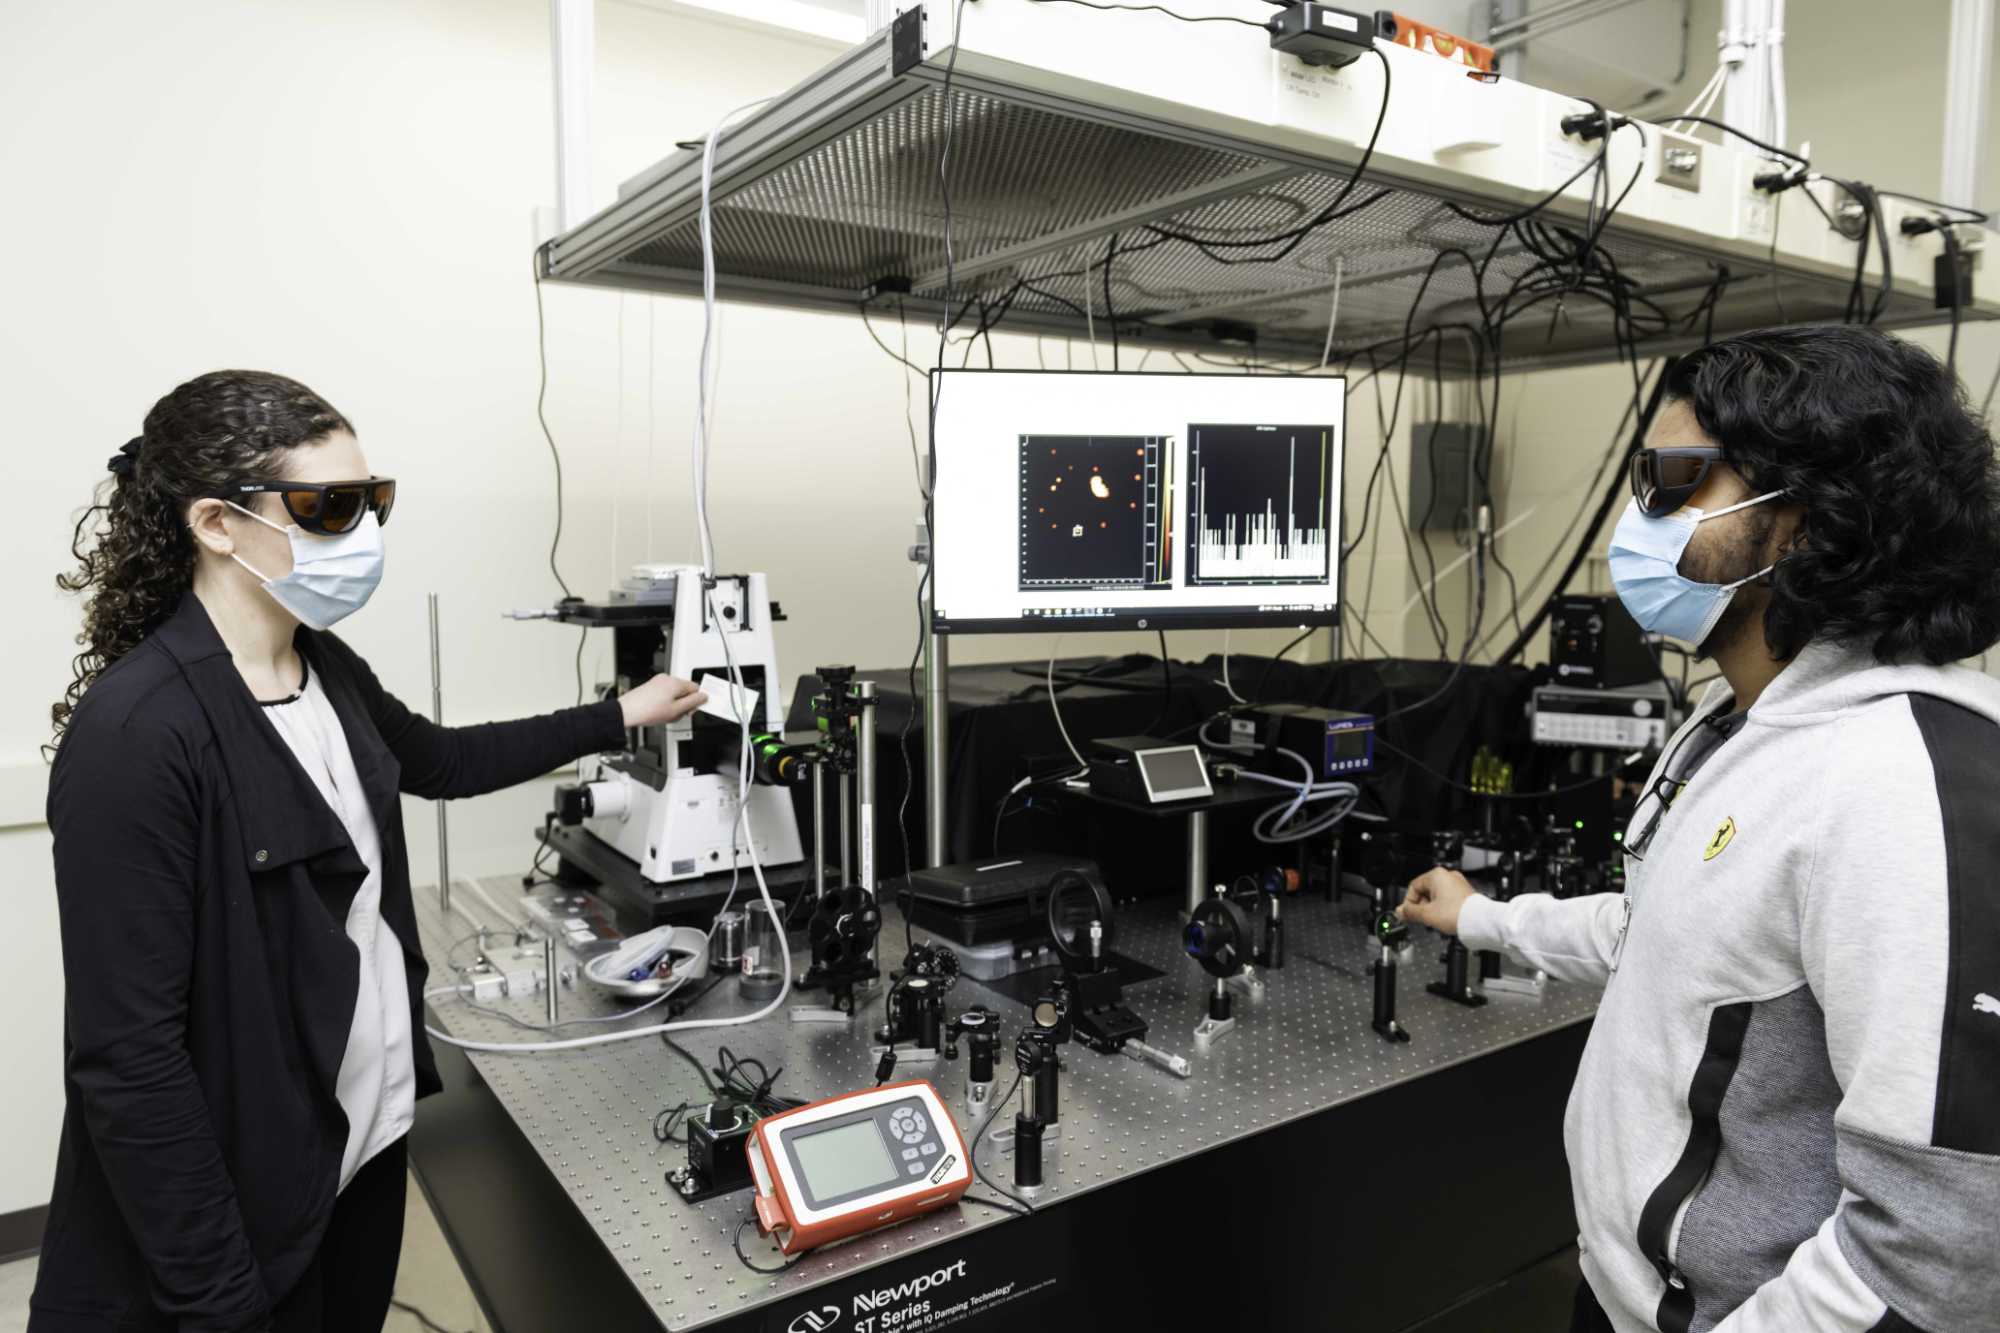 Andrea Pickel and Dinesh Bommidi in masks and protective eye gear near a laser system.